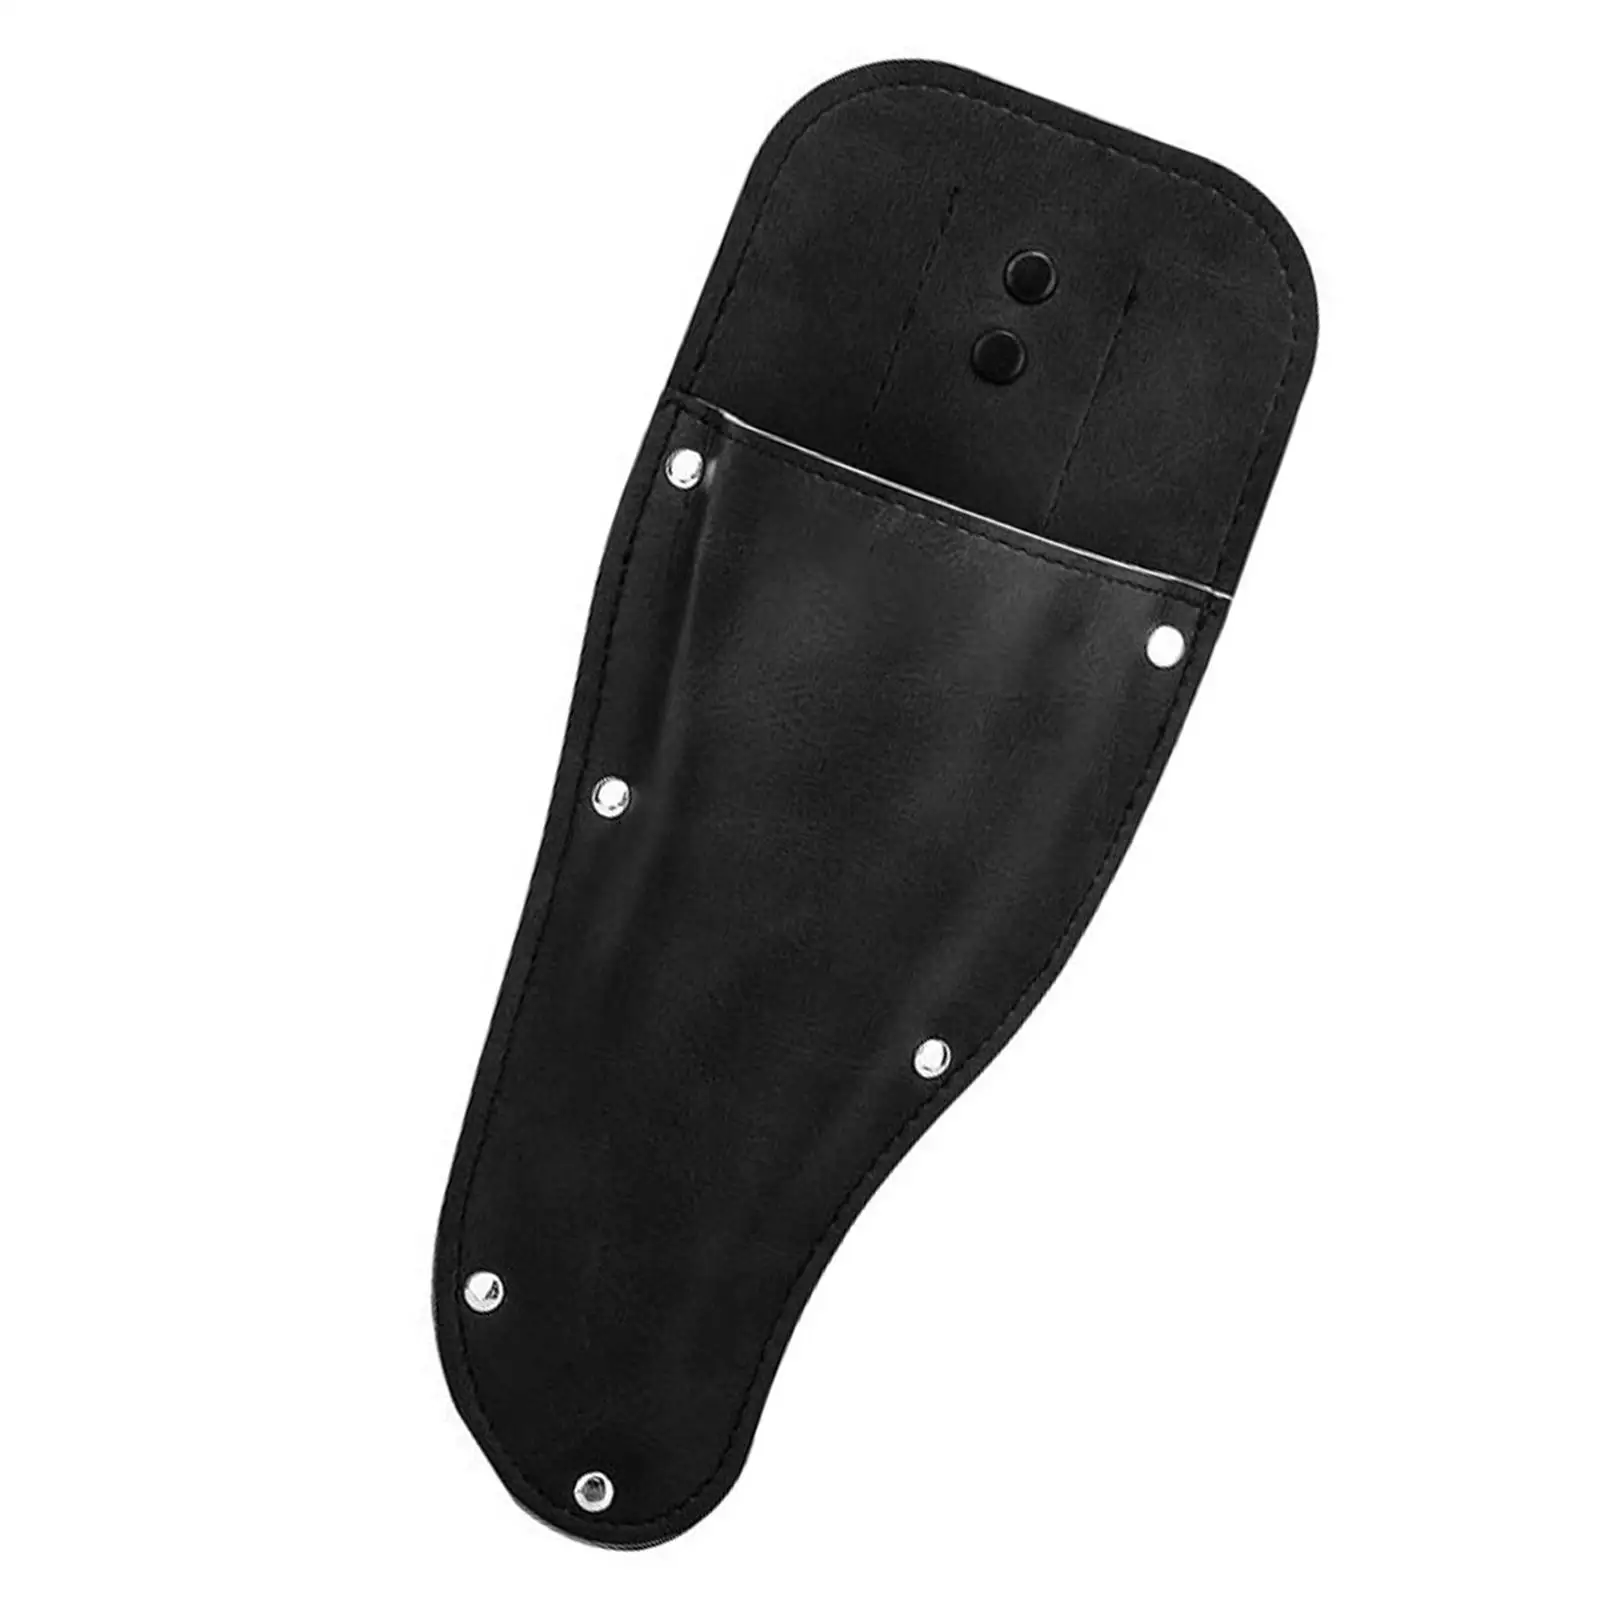 PU Leather Sheath Pouch Holder Scabbard Cover Hanging Protective Case Tool Pouch Bag for Gardening Tools